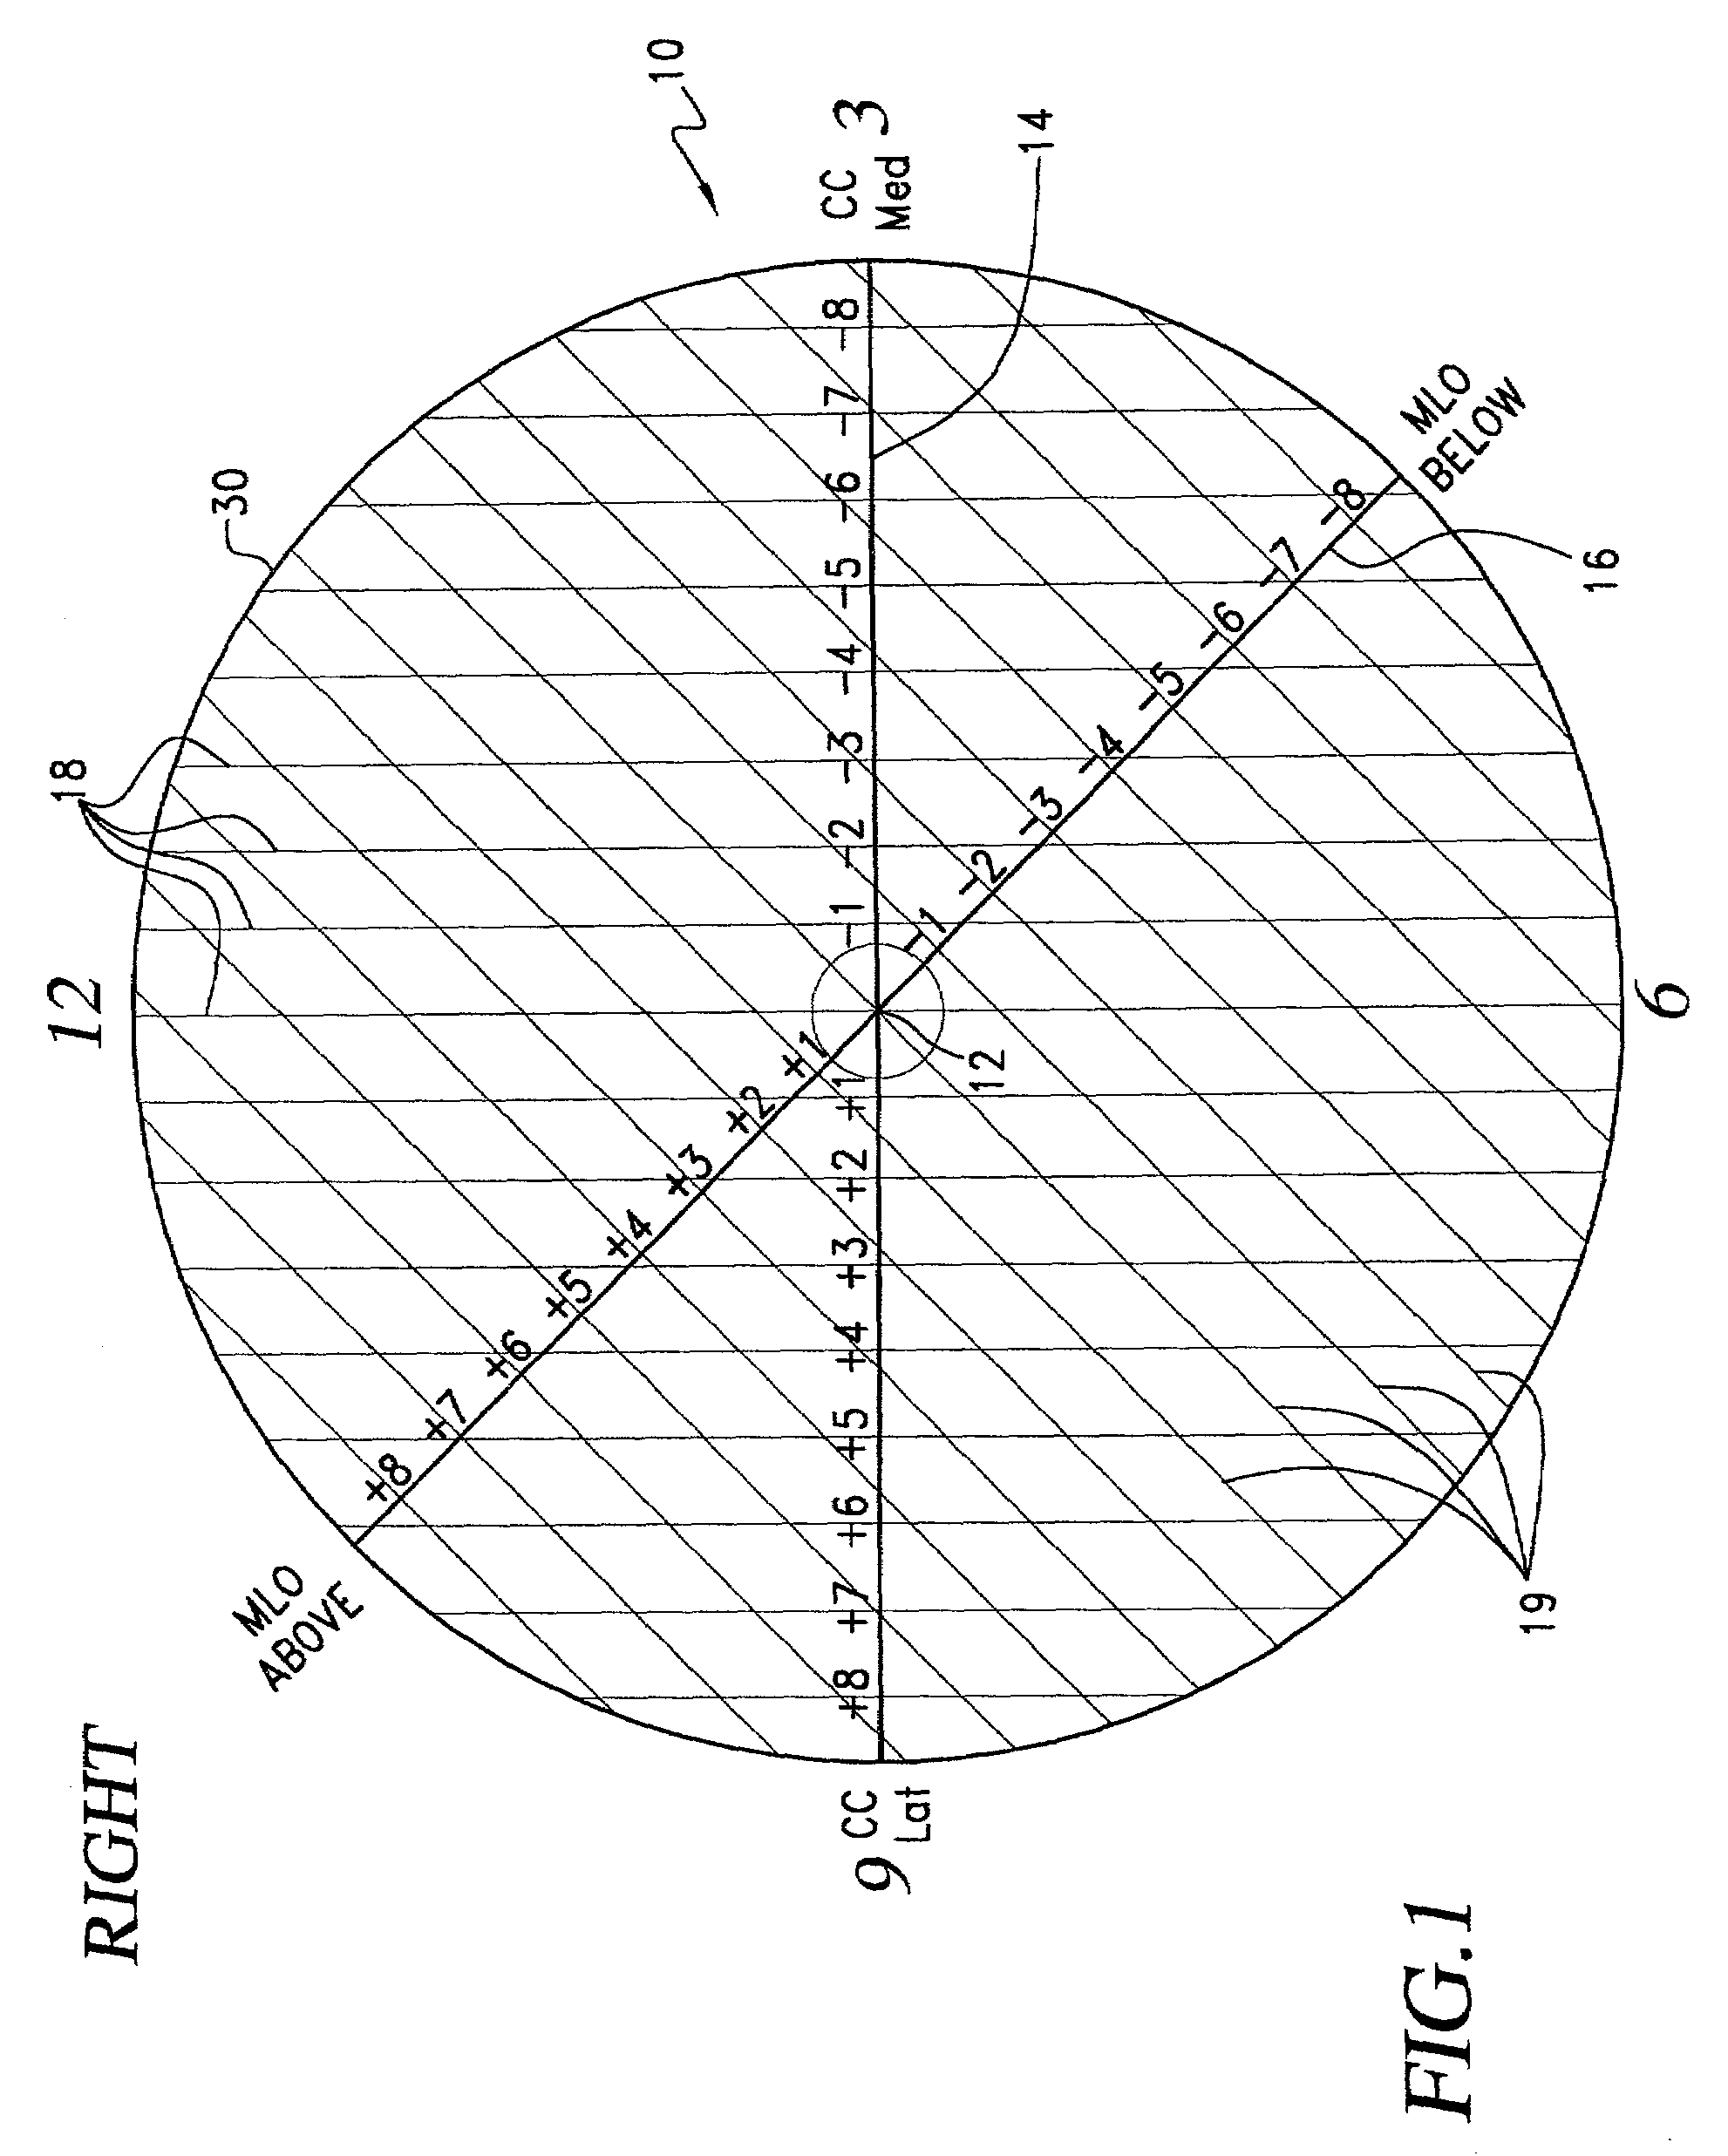 Template for the localization of lesions in a breast and method of use thereof